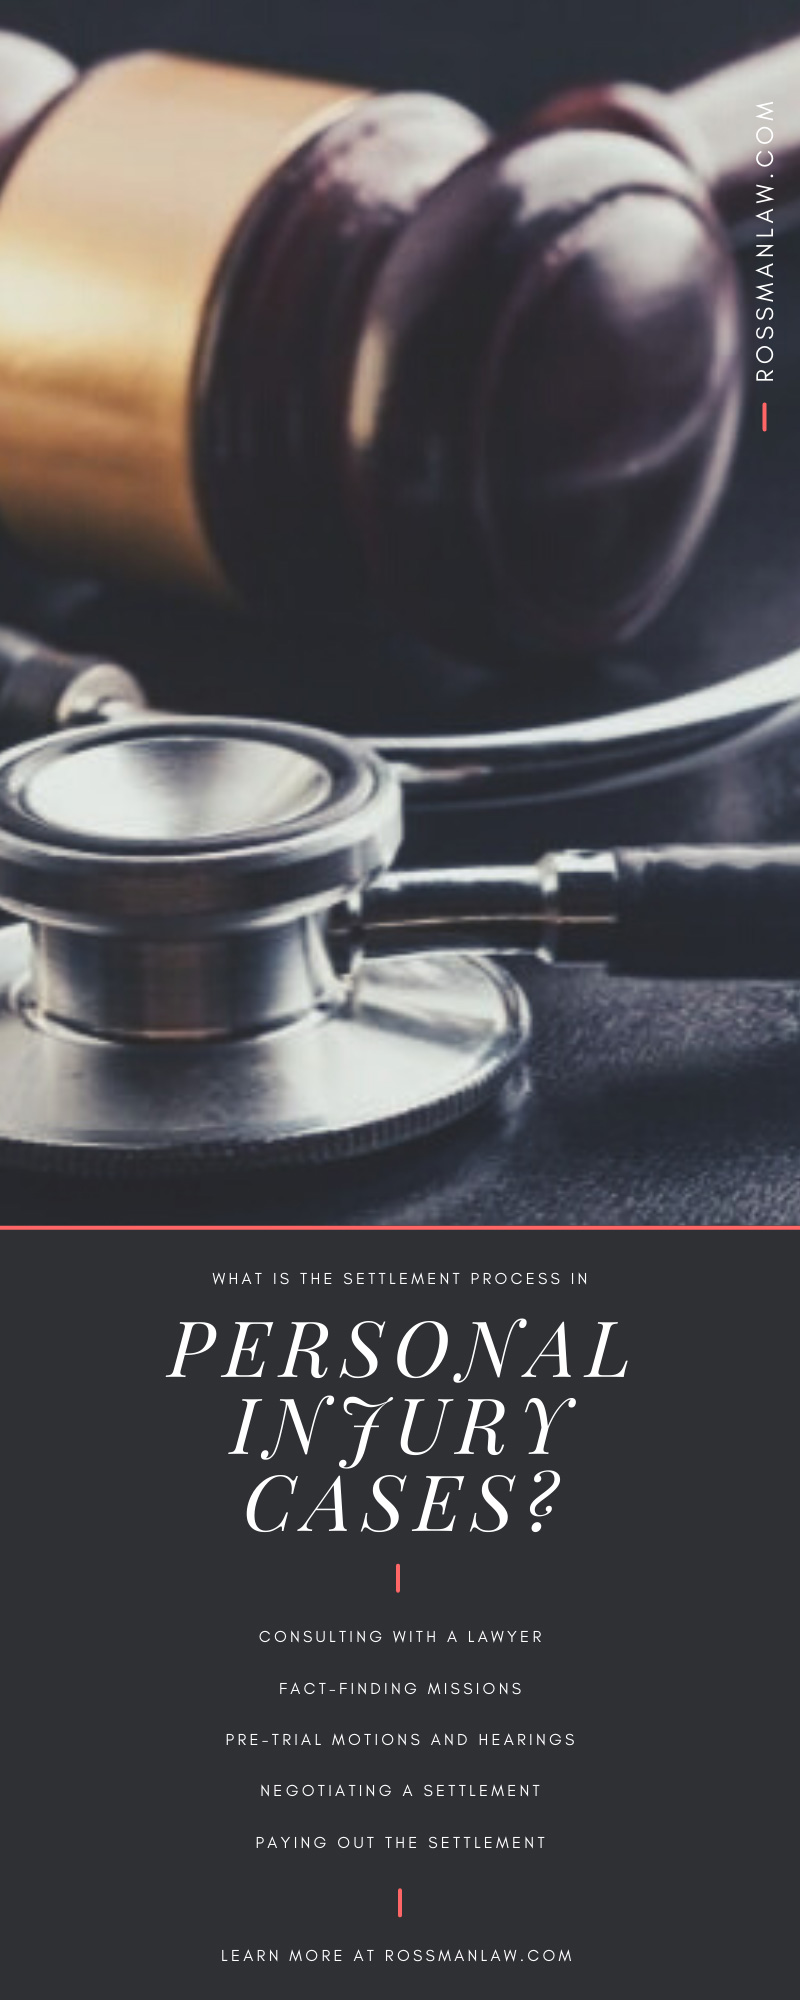 What Is the Settlement Process in Personal Injury Cases?